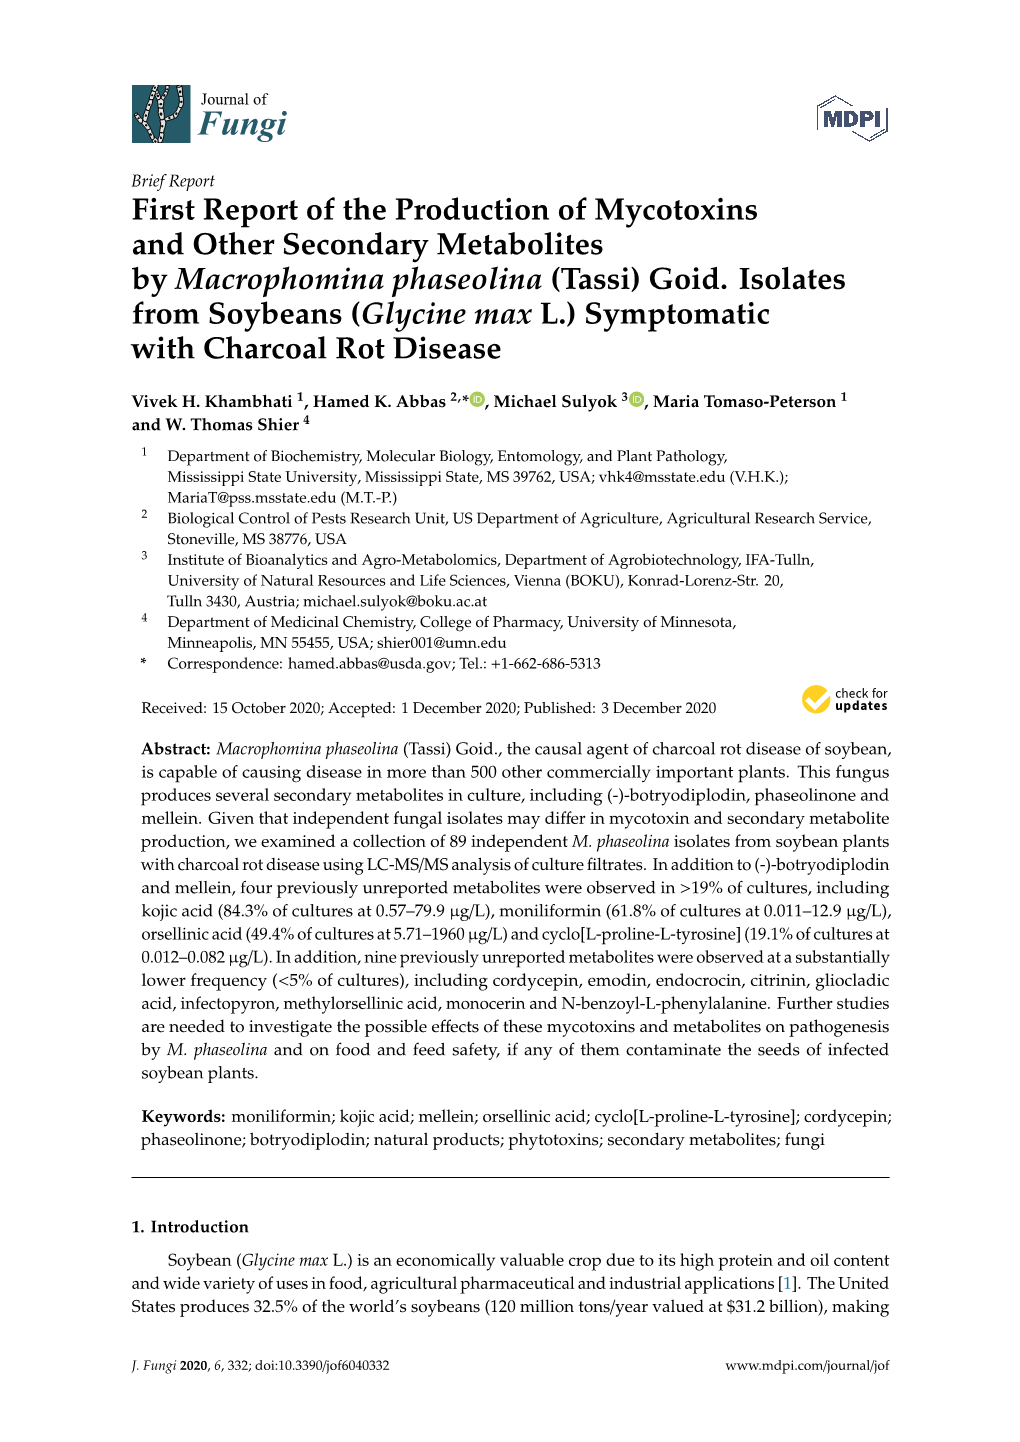 First Report of the Production of Mycotoxins and Other Secondary Metabolites by Macrophomina Phaseolina (Tassi) Goid. Isolates F